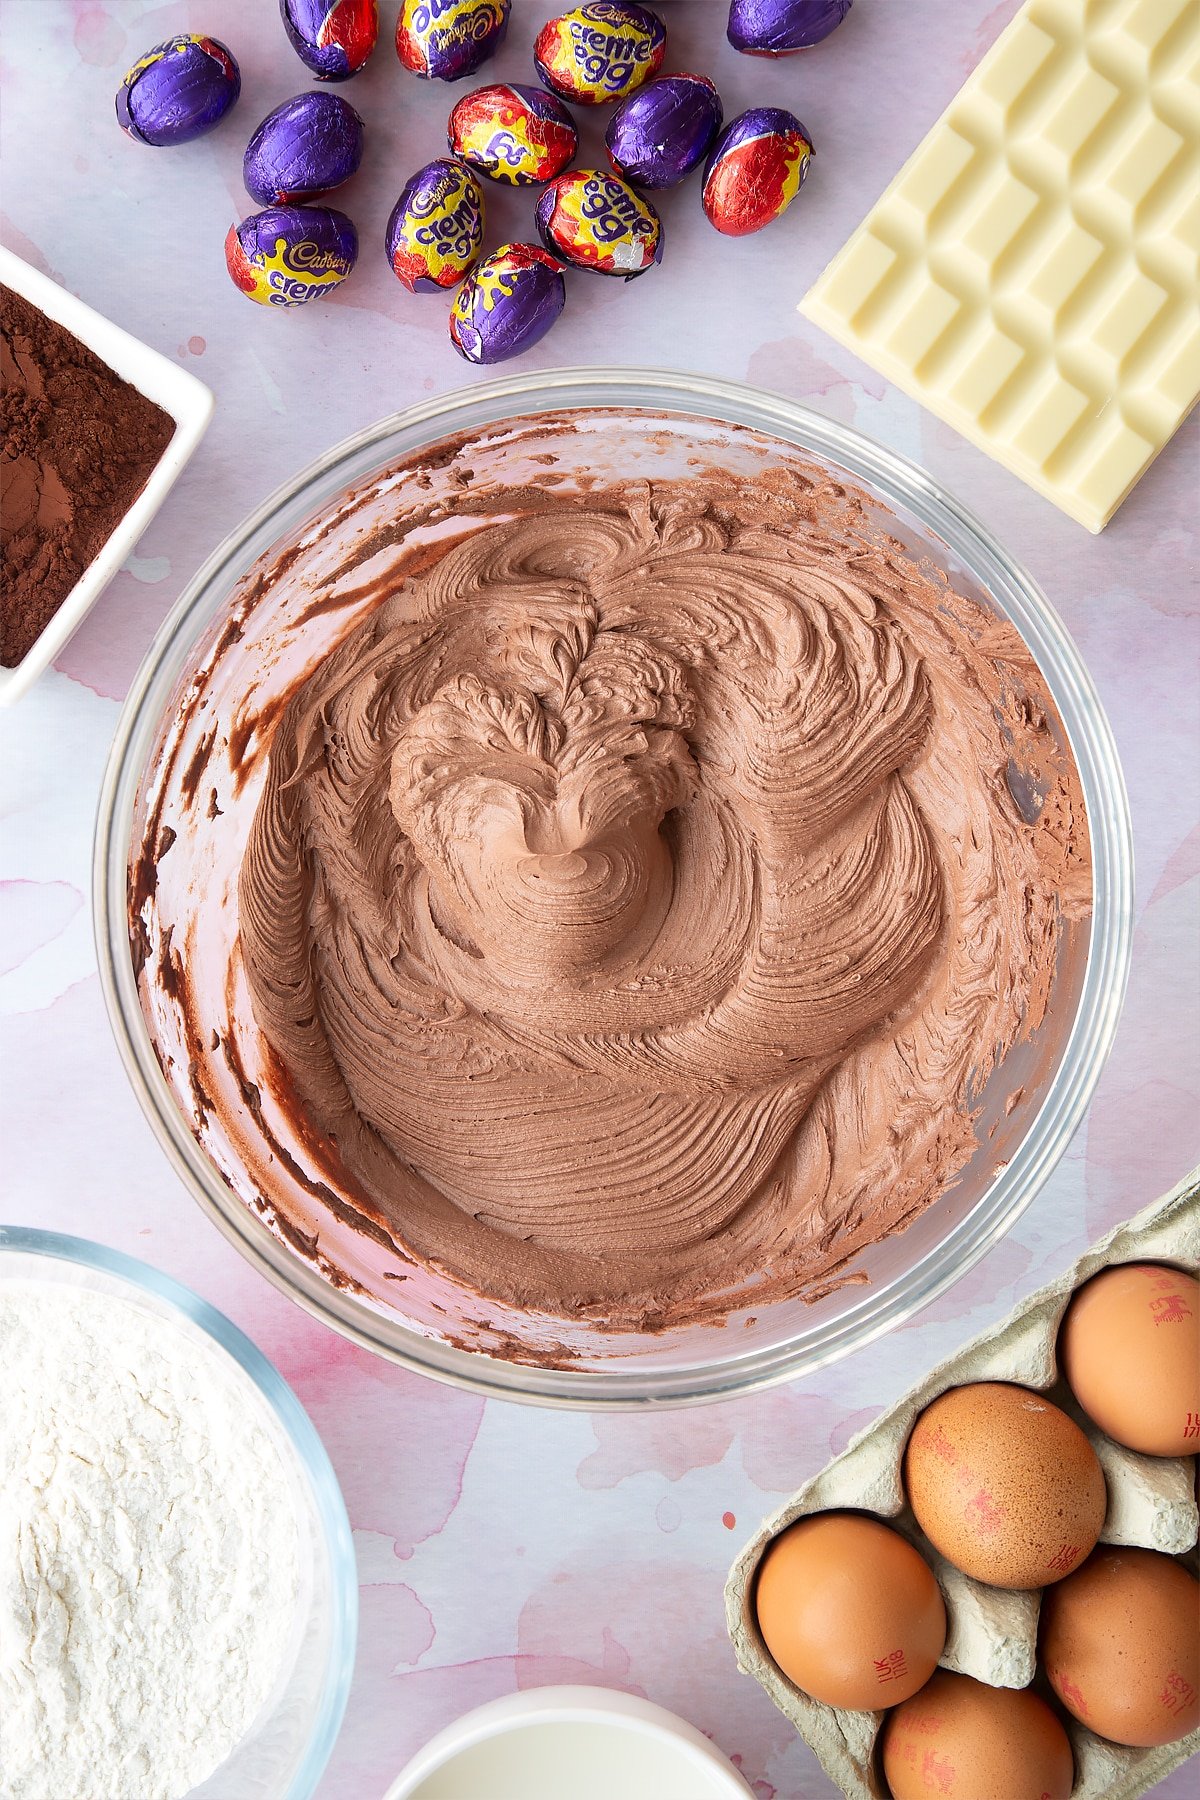 Chocolate frosting in a bowl. Ingredients to make Cadbury Creme Egg cakes surround the bowl.